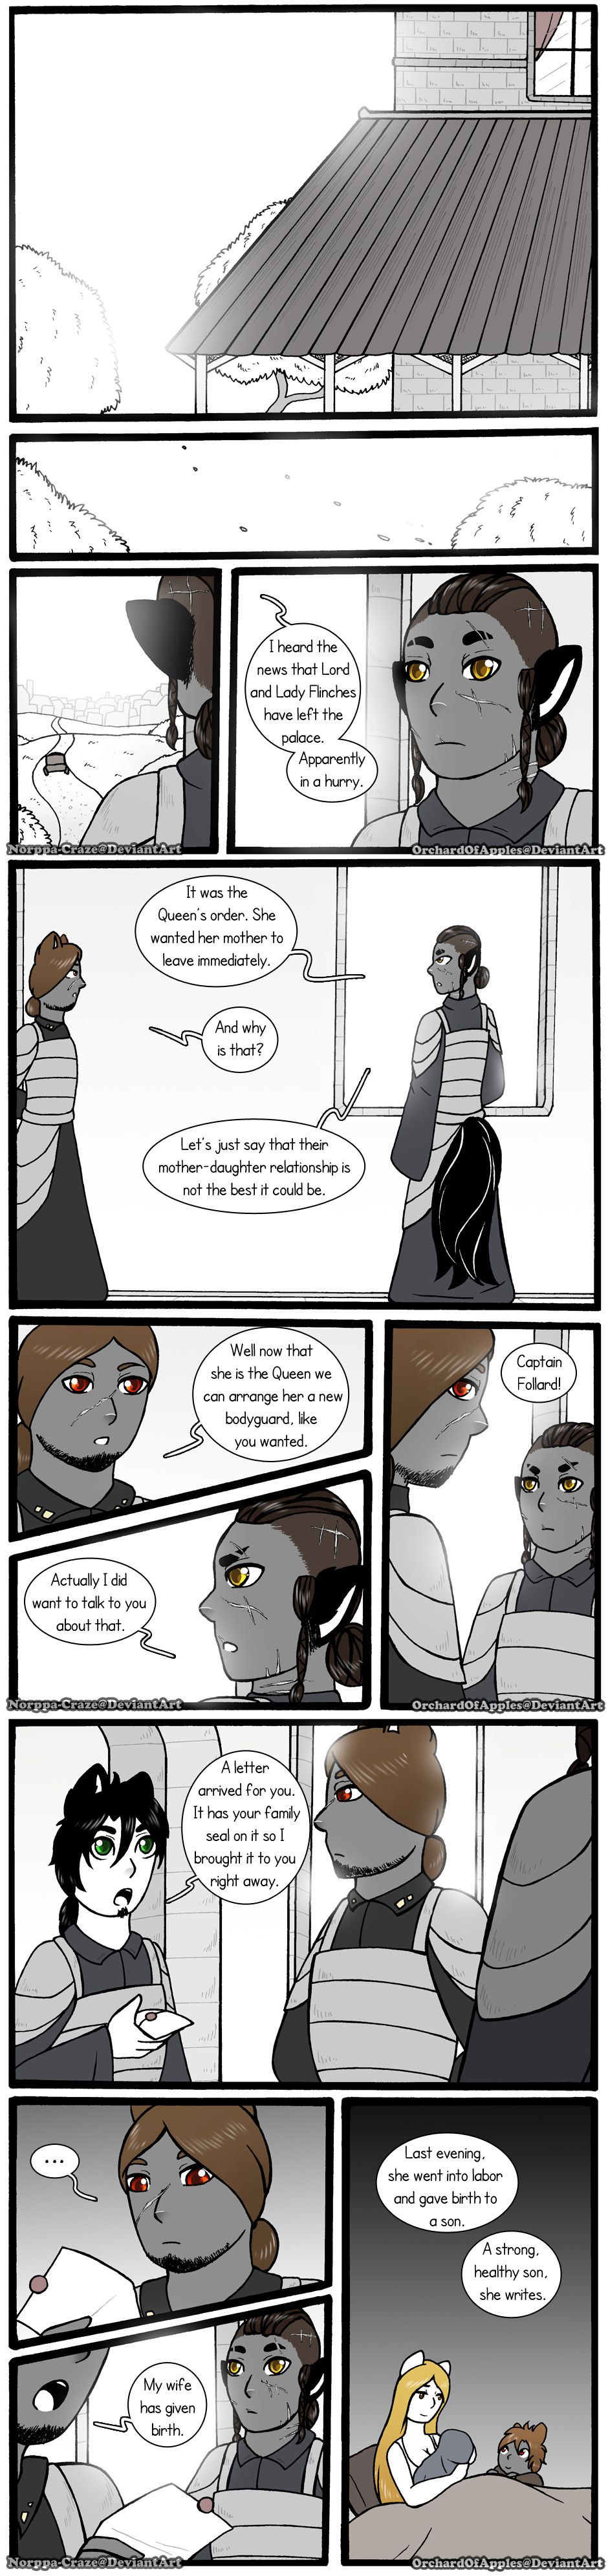 [Jeny-jen94] Between Kings and Queens [Ongoing] 295